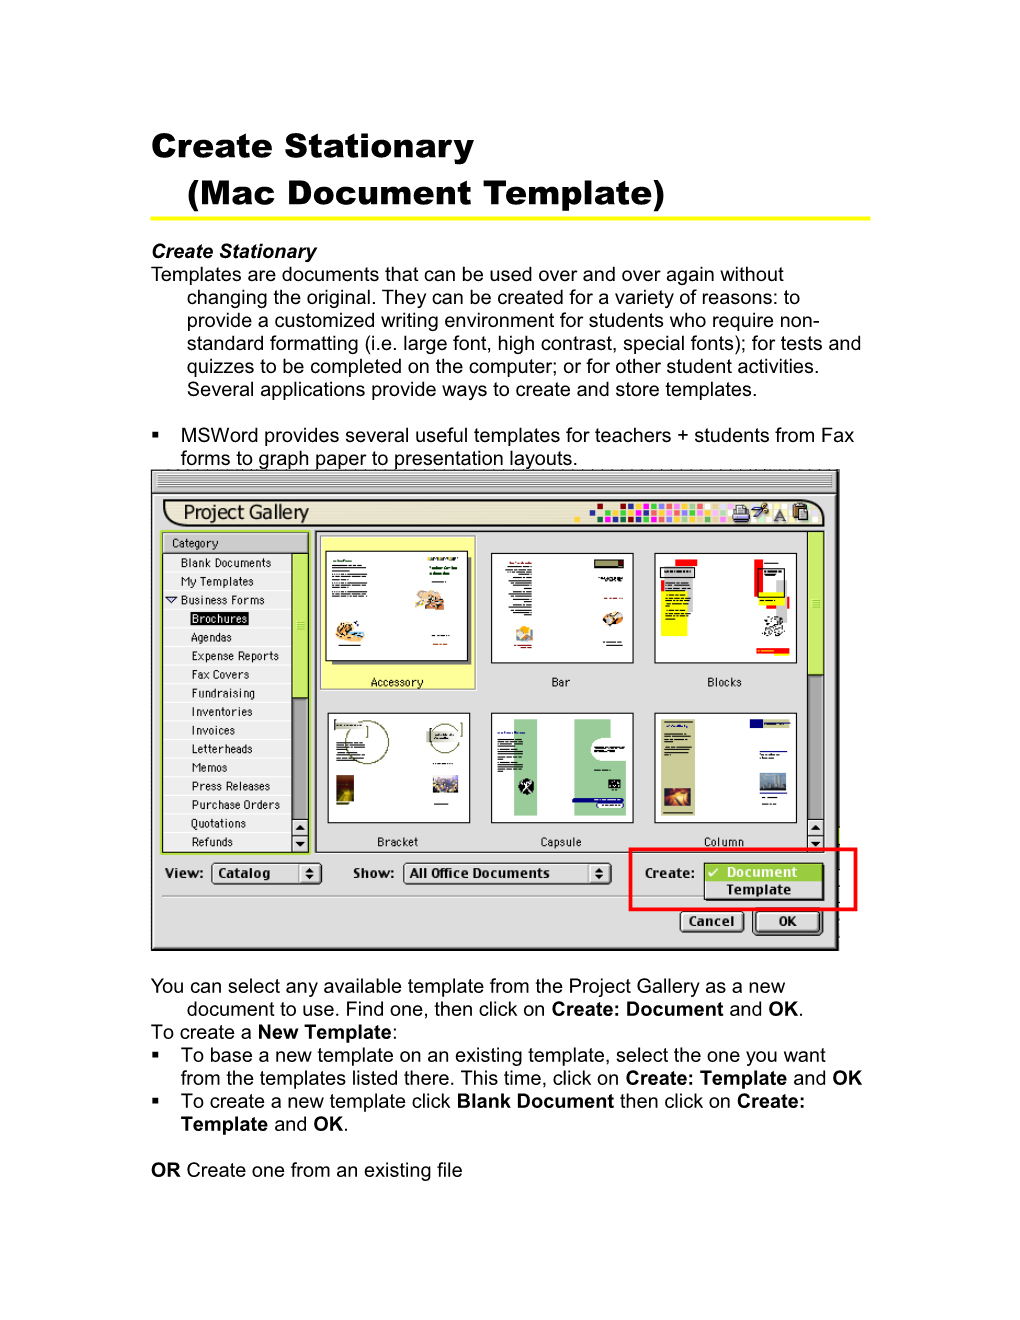 Create a Document Template (Stationary)